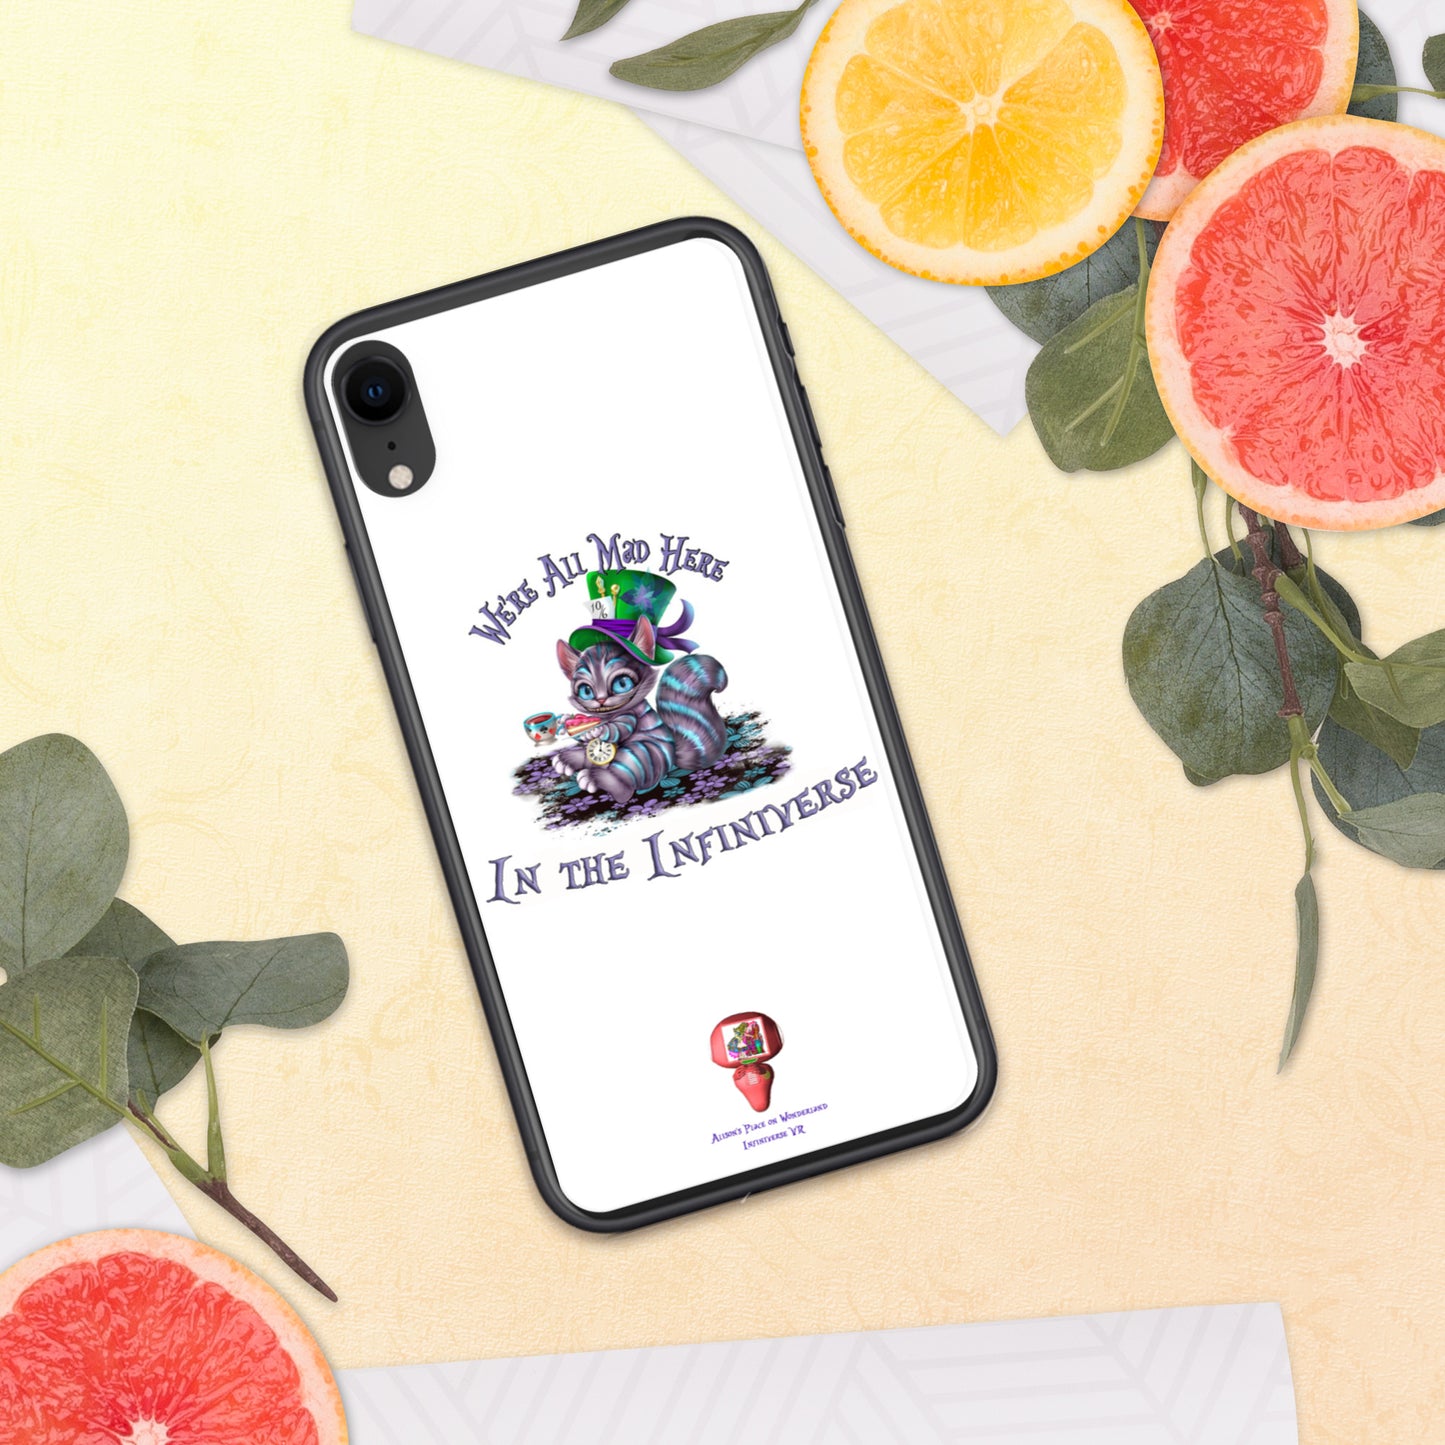 We're All Mad Here in the Infiniverse Iphone Case